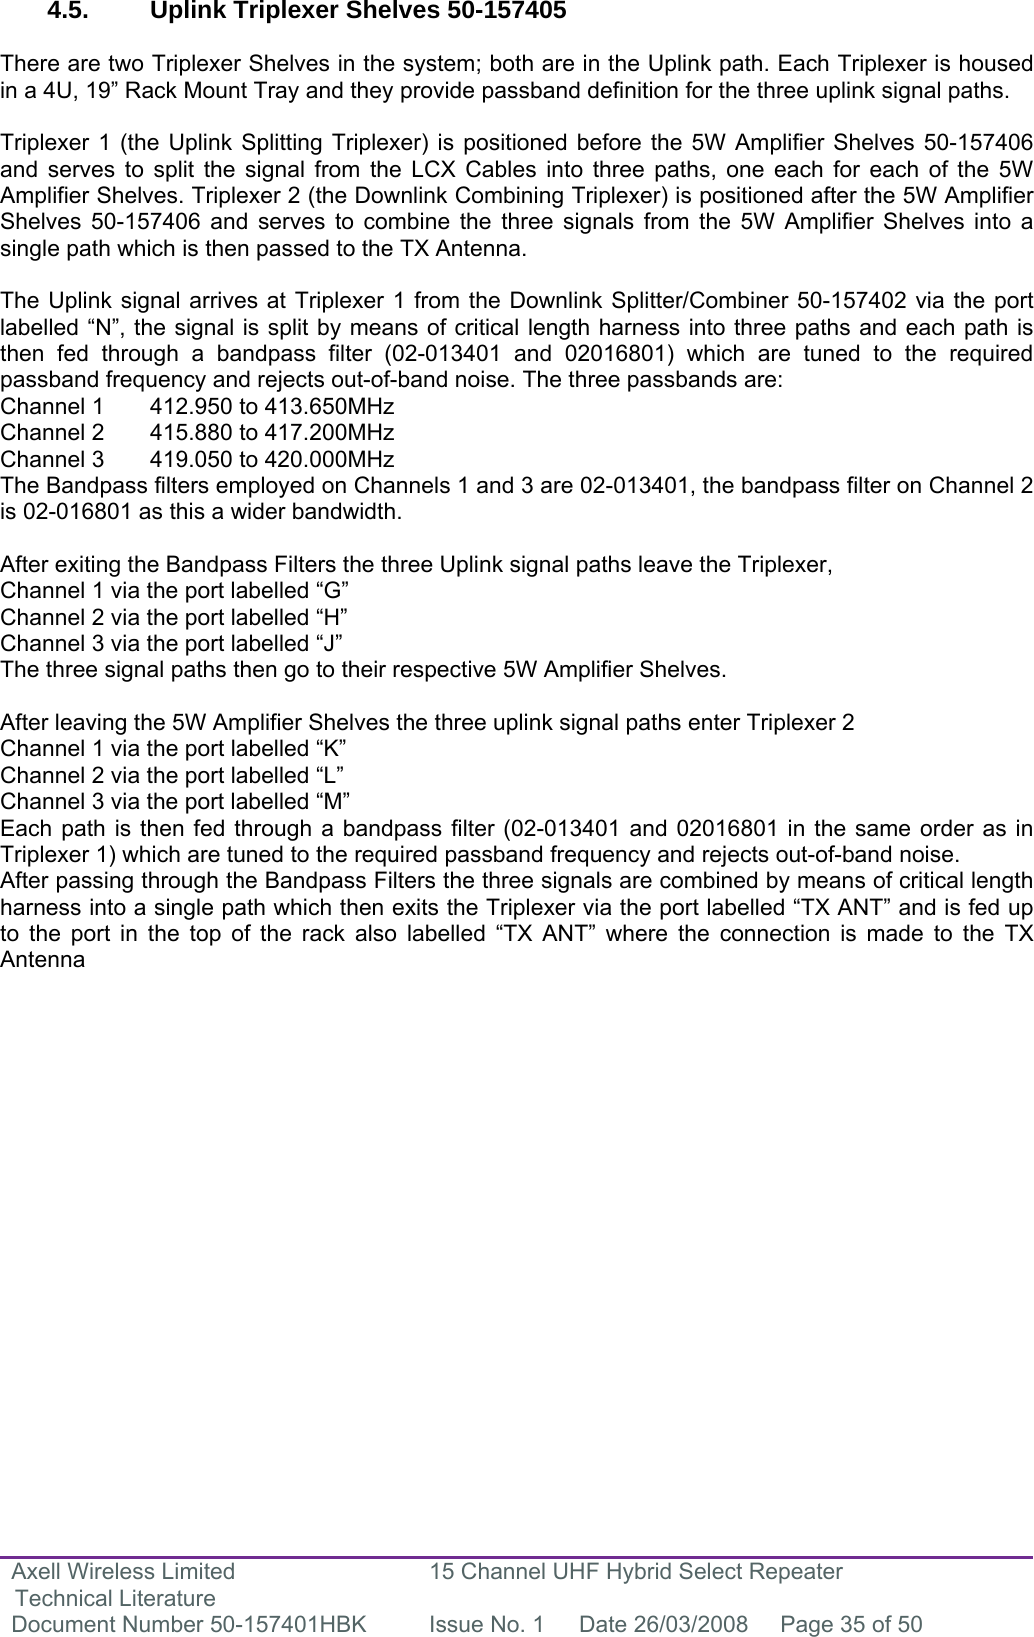 Axell Wireless Limited Technical Literature 15 Channel UHF Hybrid Select Repeater Document Number 50-157401HBK  Issue No. 1  Date 26/03/2008  Page 35 of 50   4.5.  Uplink Triplexer Shelves 50-157405   There are two Triplexer Shelves in the system; both are in the Uplink path. Each Triplexer is housed in a 4U, 19” Rack Mount Tray and they provide passband definition for the three uplink signal paths.   Triplexer 1 (the Uplink Splitting Triplexer) is positioned before the 5W Amplifier Shelves 50-157406 and serves to split the signal from the LCX Cables into three paths, one each for each of the 5W Amplifier Shelves. Triplexer 2 (the Downlink Combining Triplexer) is positioned after the 5W Amplifier Shelves 50-157406 and serves to combine the three signals from the 5W Amplifier Shelves into a single path which is then passed to the TX Antenna.  The Uplink signal arrives at Triplexer 1 from the Downlink Splitter/Combiner 50-157402 via the port labelled “N”, the signal is split by means of critical length harness into three paths and each path is then fed through a bandpass filter (02-013401 and 02016801) which are tuned to the required passband frequency and rejects out-of-band noise. The three passbands are: Channel 1  412.950 to 413.650MHz Channel 2  415.880 to 417.200MHz Channel 3  419.050 to 420.000MHz The Bandpass filters employed on Channels 1 and 3 are 02-013401, the bandpass filter on Channel 2 is 02-016801 as this a wider bandwidth.  After exiting the Bandpass Filters the three Uplink signal paths leave the Triplexer, Channel 1 via the port labelled “G” Channel 2 via the port labelled “H” Channel 3 via the port labelled “J” The three signal paths then go to their respective 5W Amplifier Shelves.  After leaving the 5W Amplifier Shelves the three uplink signal paths enter Triplexer 2  Channel 1 via the port labelled “K” Channel 2 via the port labelled “L” Channel 3 via the port labelled “M” Each path is then fed through a bandpass filter (02-013401 and 02016801 in the same order as in Triplexer 1) which are tuned to the required passband frequency and rejects out-of-band noise. After passing through the Bandpass Filters the three signals are combined by means of critical length harness into a single path which then exits the Triplexer via the port labelled “TX ANT” and is fed up to the port in the top of the rack also labelled “TX ANT” where the connection is made to the TX Antenna              